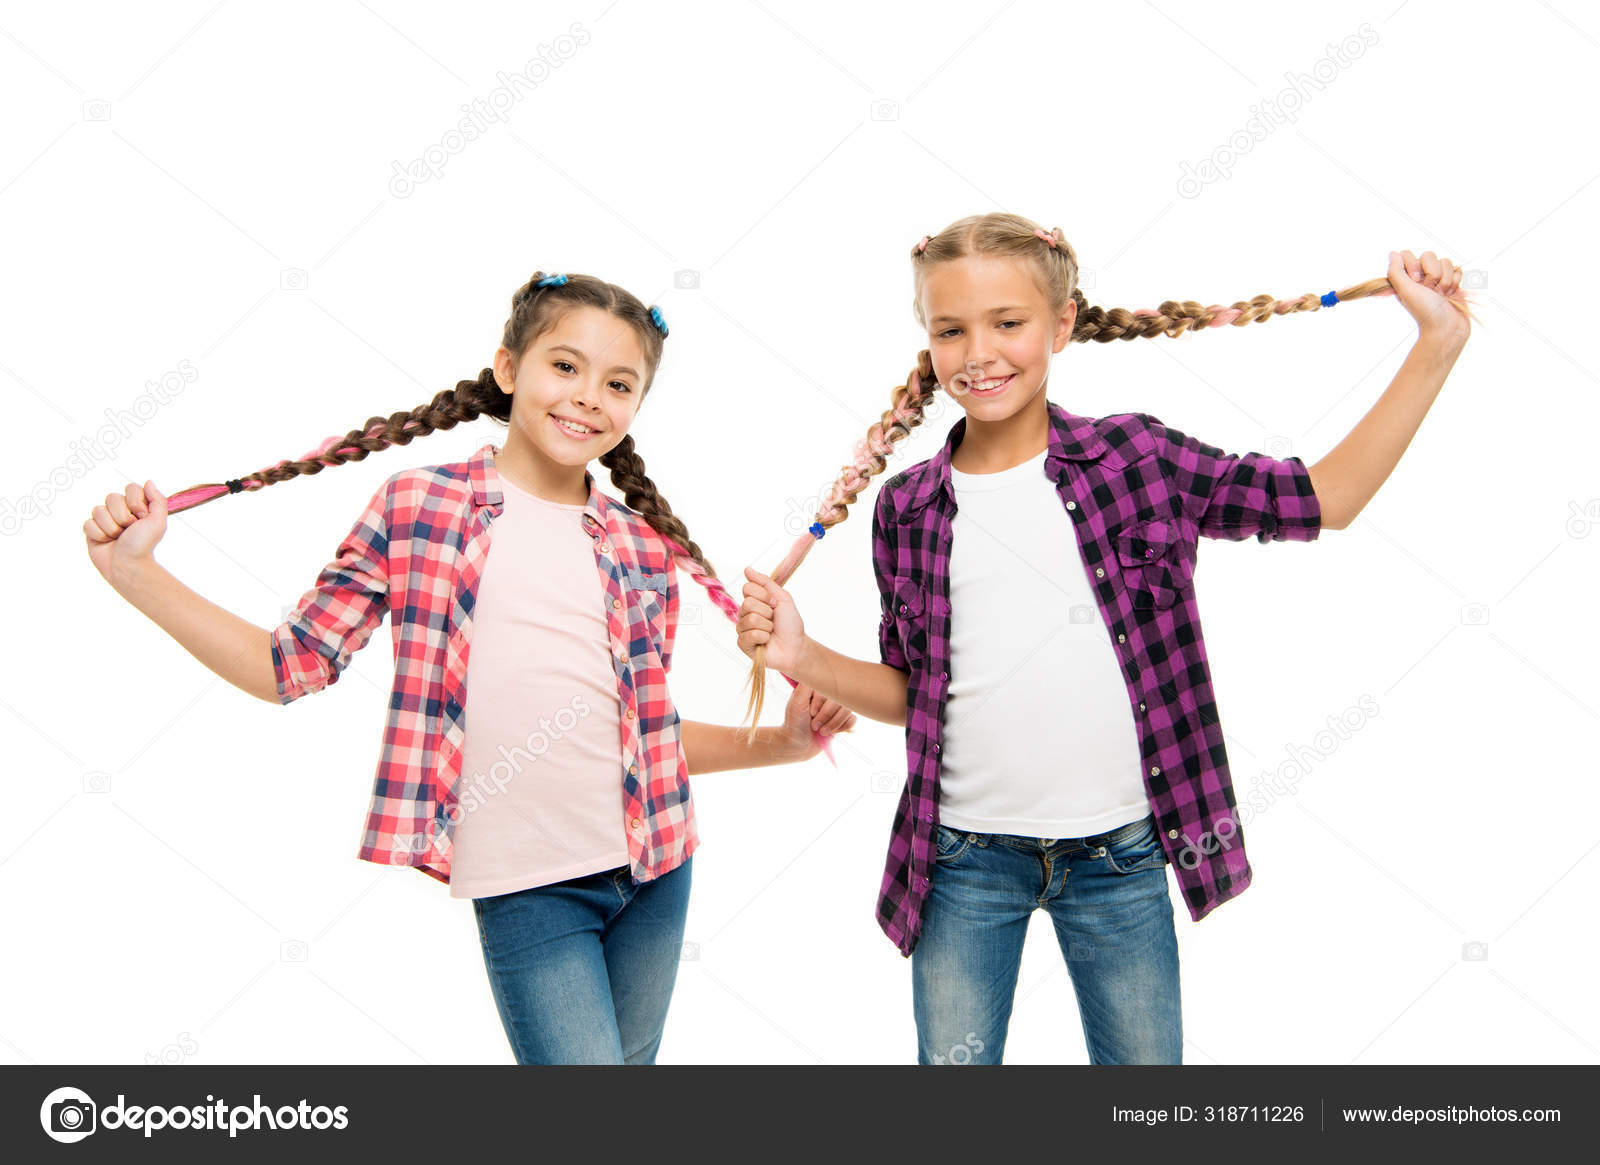 Doing cute and easy hair style. Happy children hold long braided hair style.  Small girls smile in casual fashion style. Keep your style. Fashion and  beauty. Hair salon Stock Photo by ©stetsik